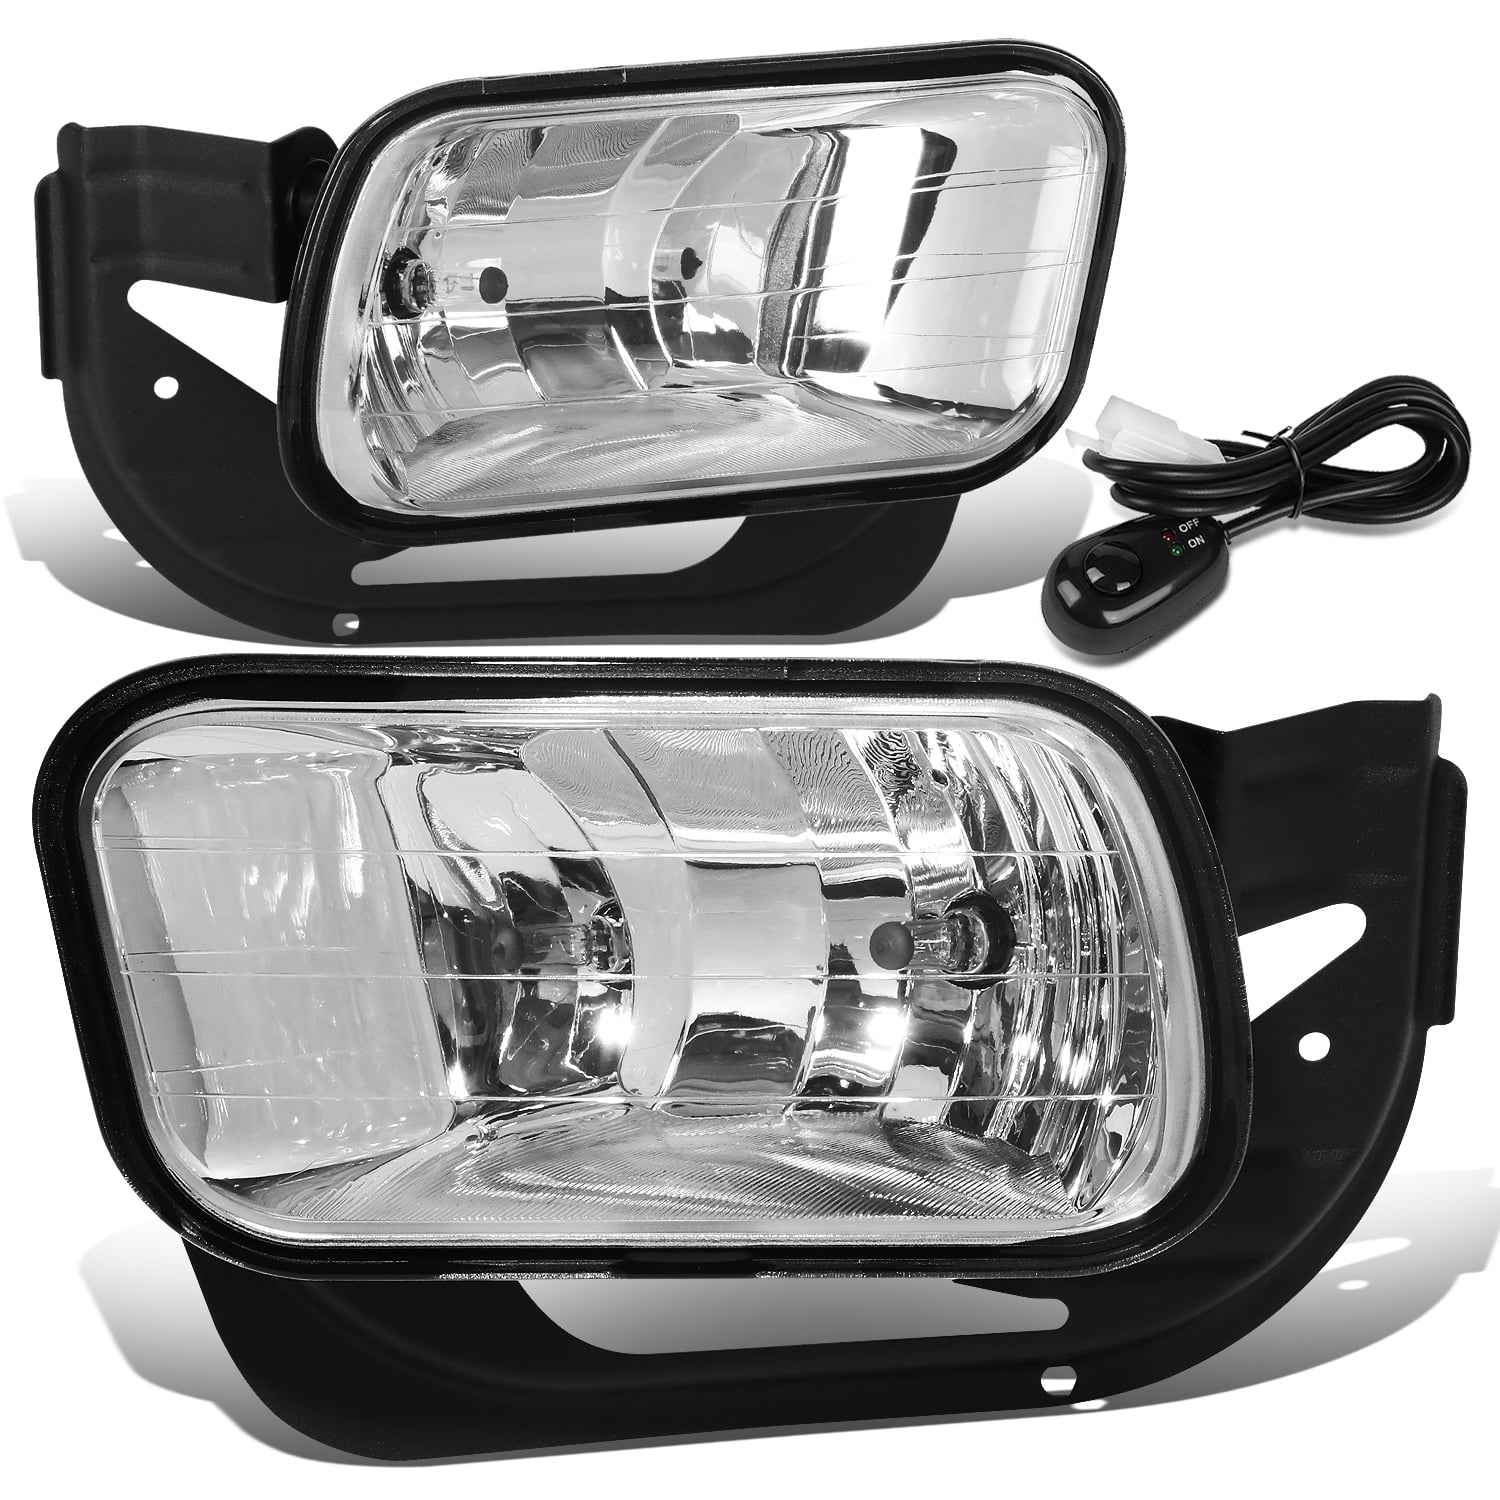 1 Pair with Left and Right Side Clear Lens Fog Lights Compatible with 2009-2018 Dodge Ram 1500 2500 3500 Bumper Driving Fog Lamps Assemblies 